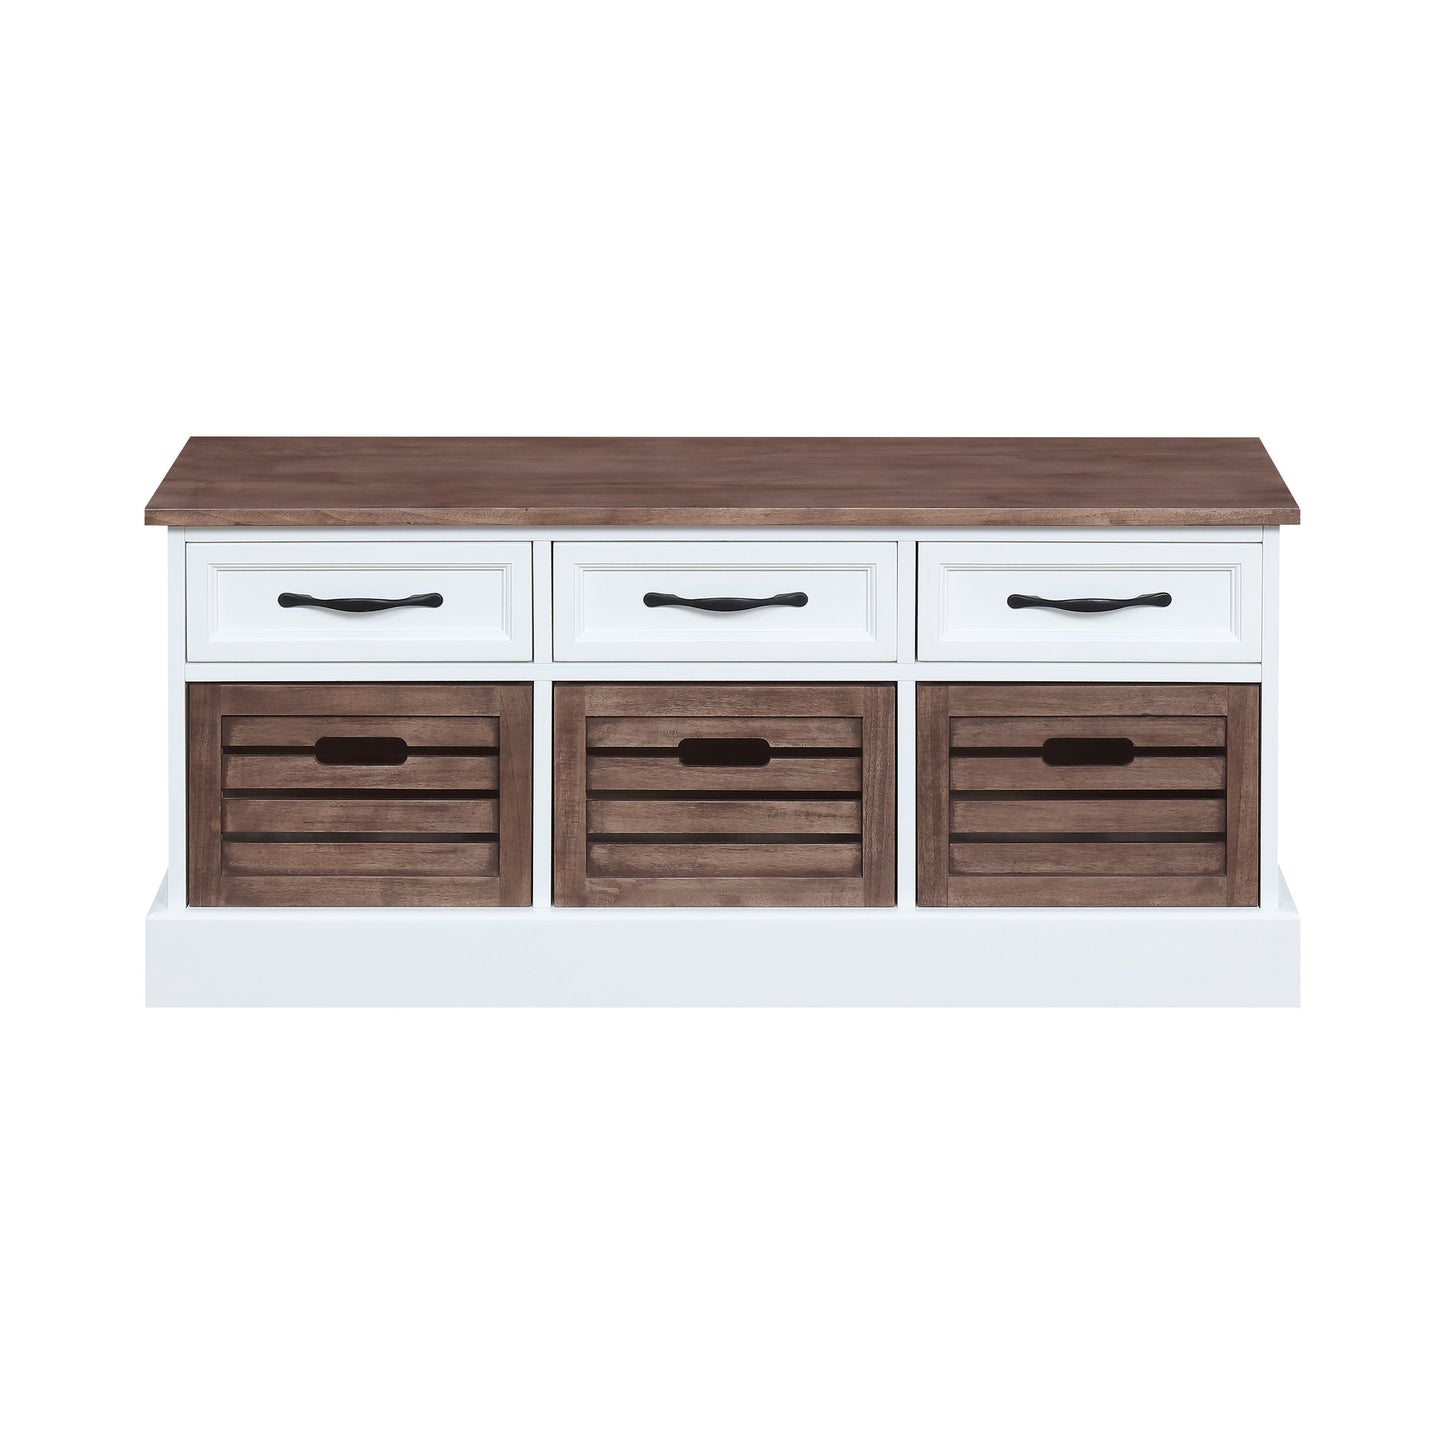 3-drawer Storage Bench Weathered Brown and White